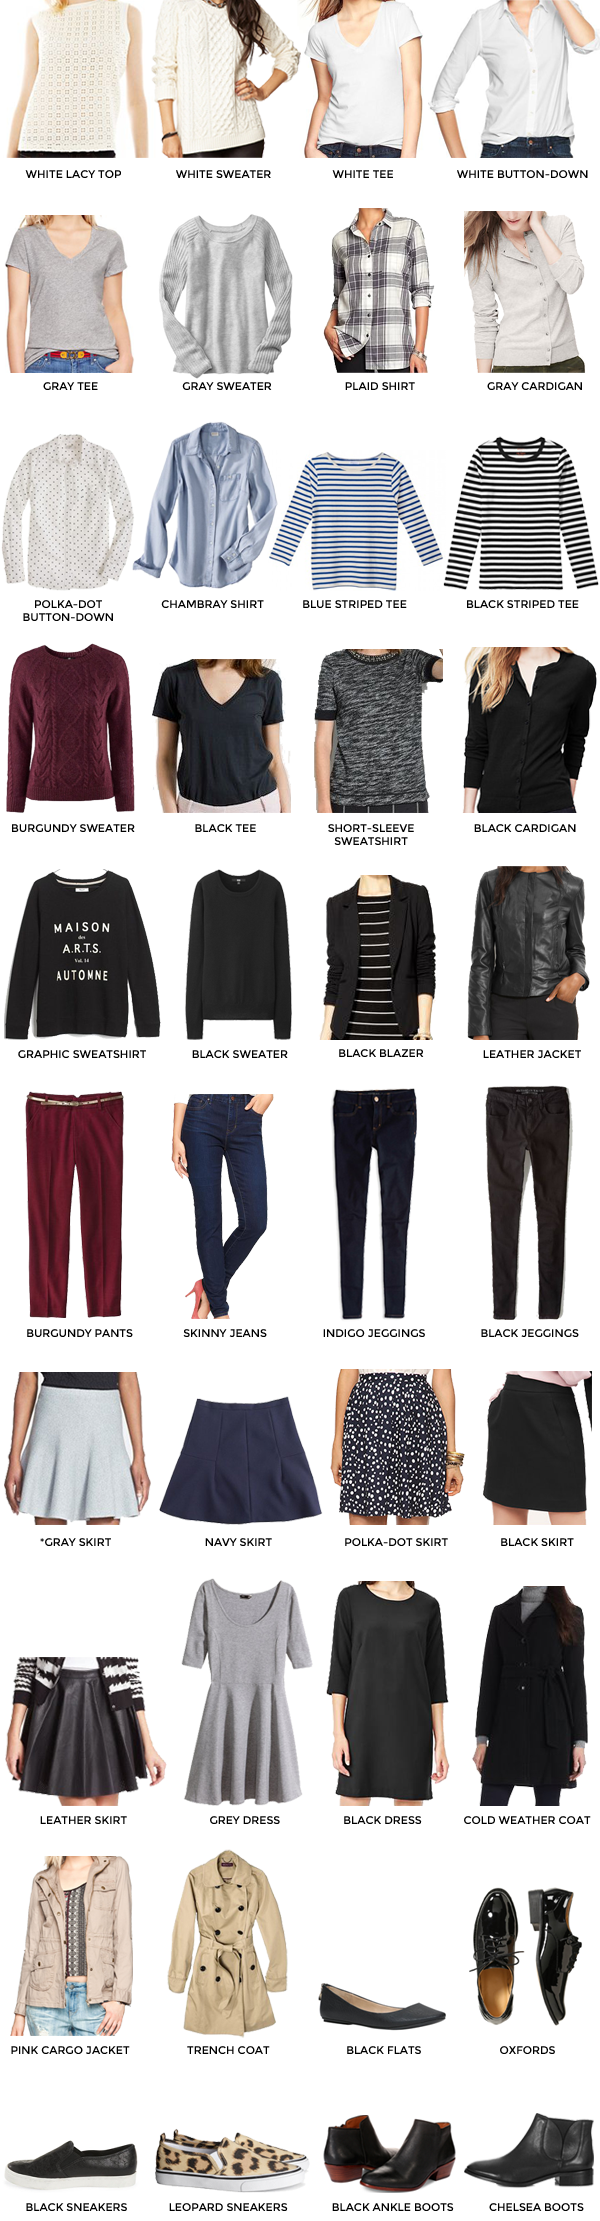 fall capsule wardrobe 2014, capsule wardrobe, fall wardrobe, what to wear this fall, capsule collection, autumn capsule, autumn wardrobe